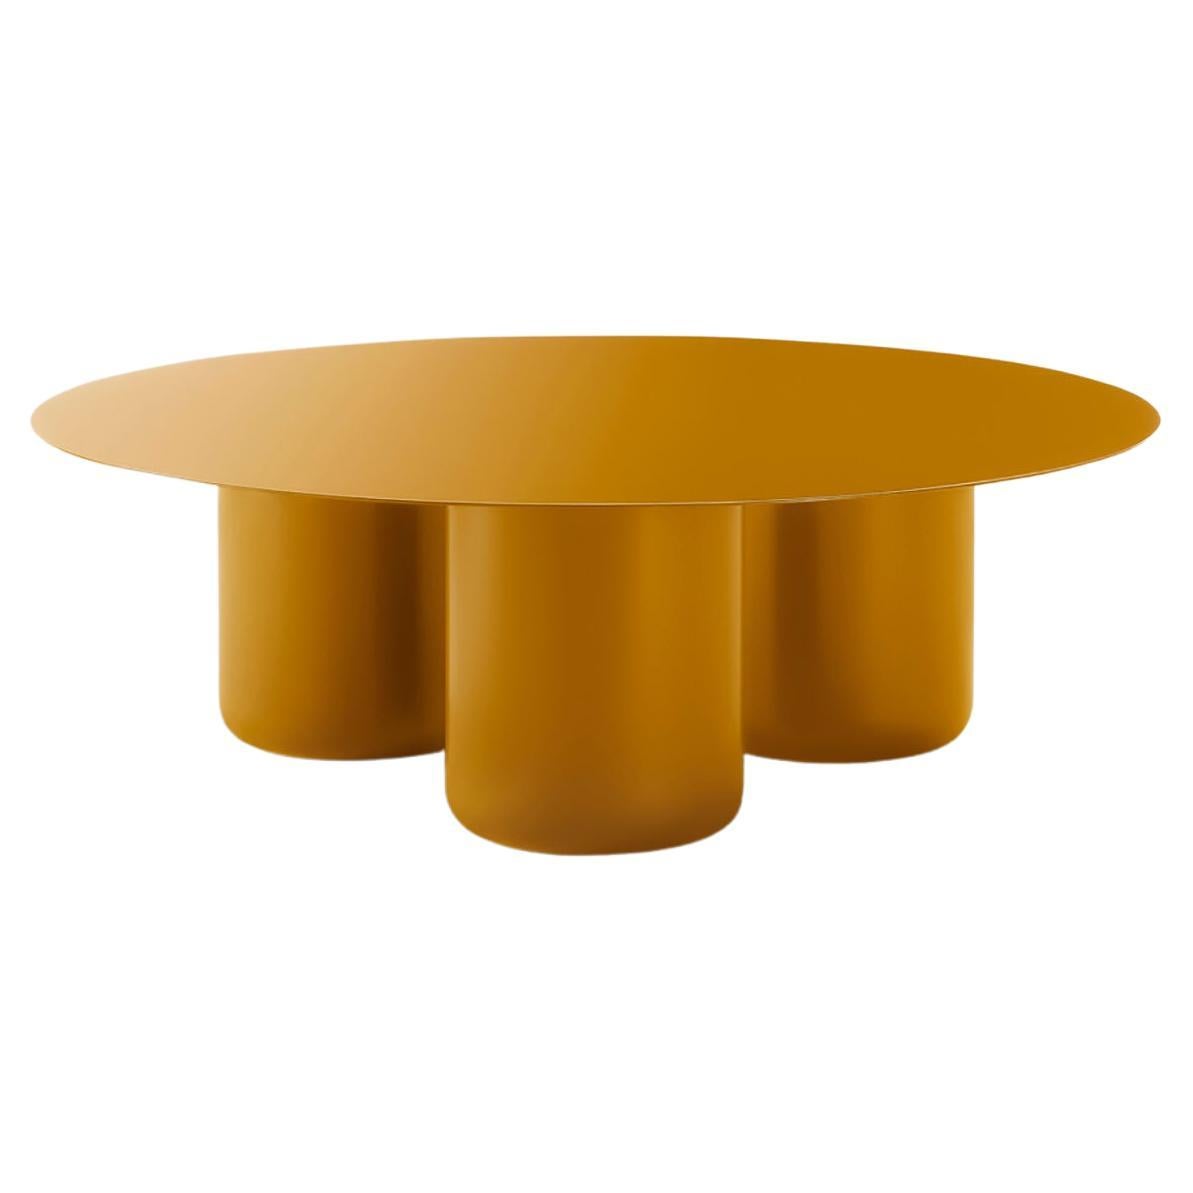 Sunshine Yellow Round Table by Coco Flip